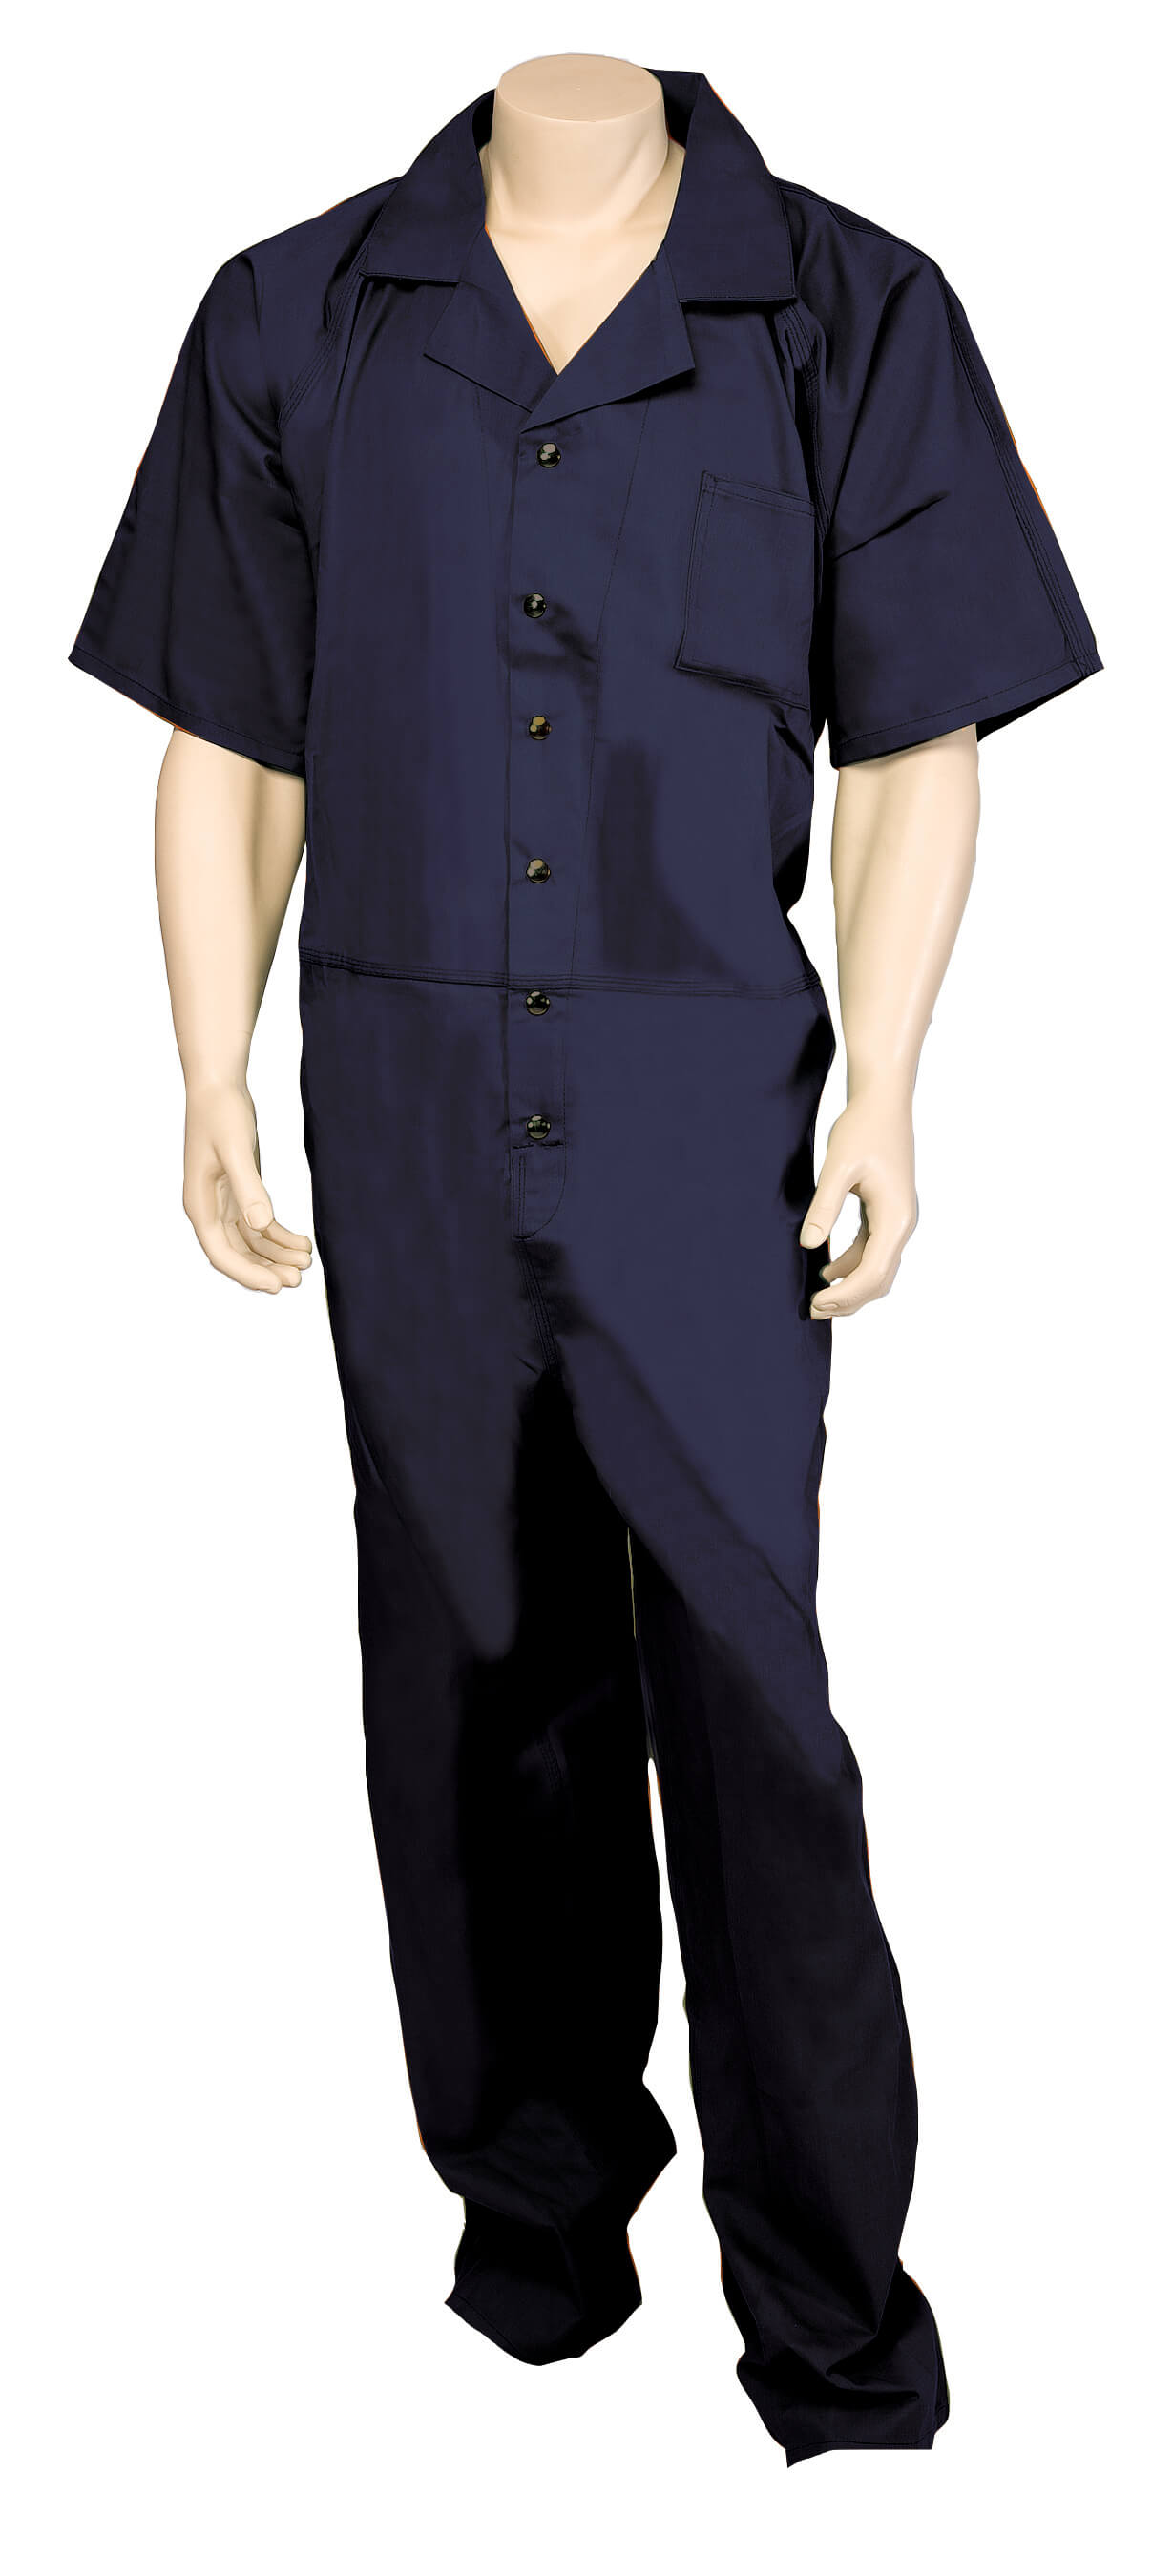 Solid Color Inmate Coveralls